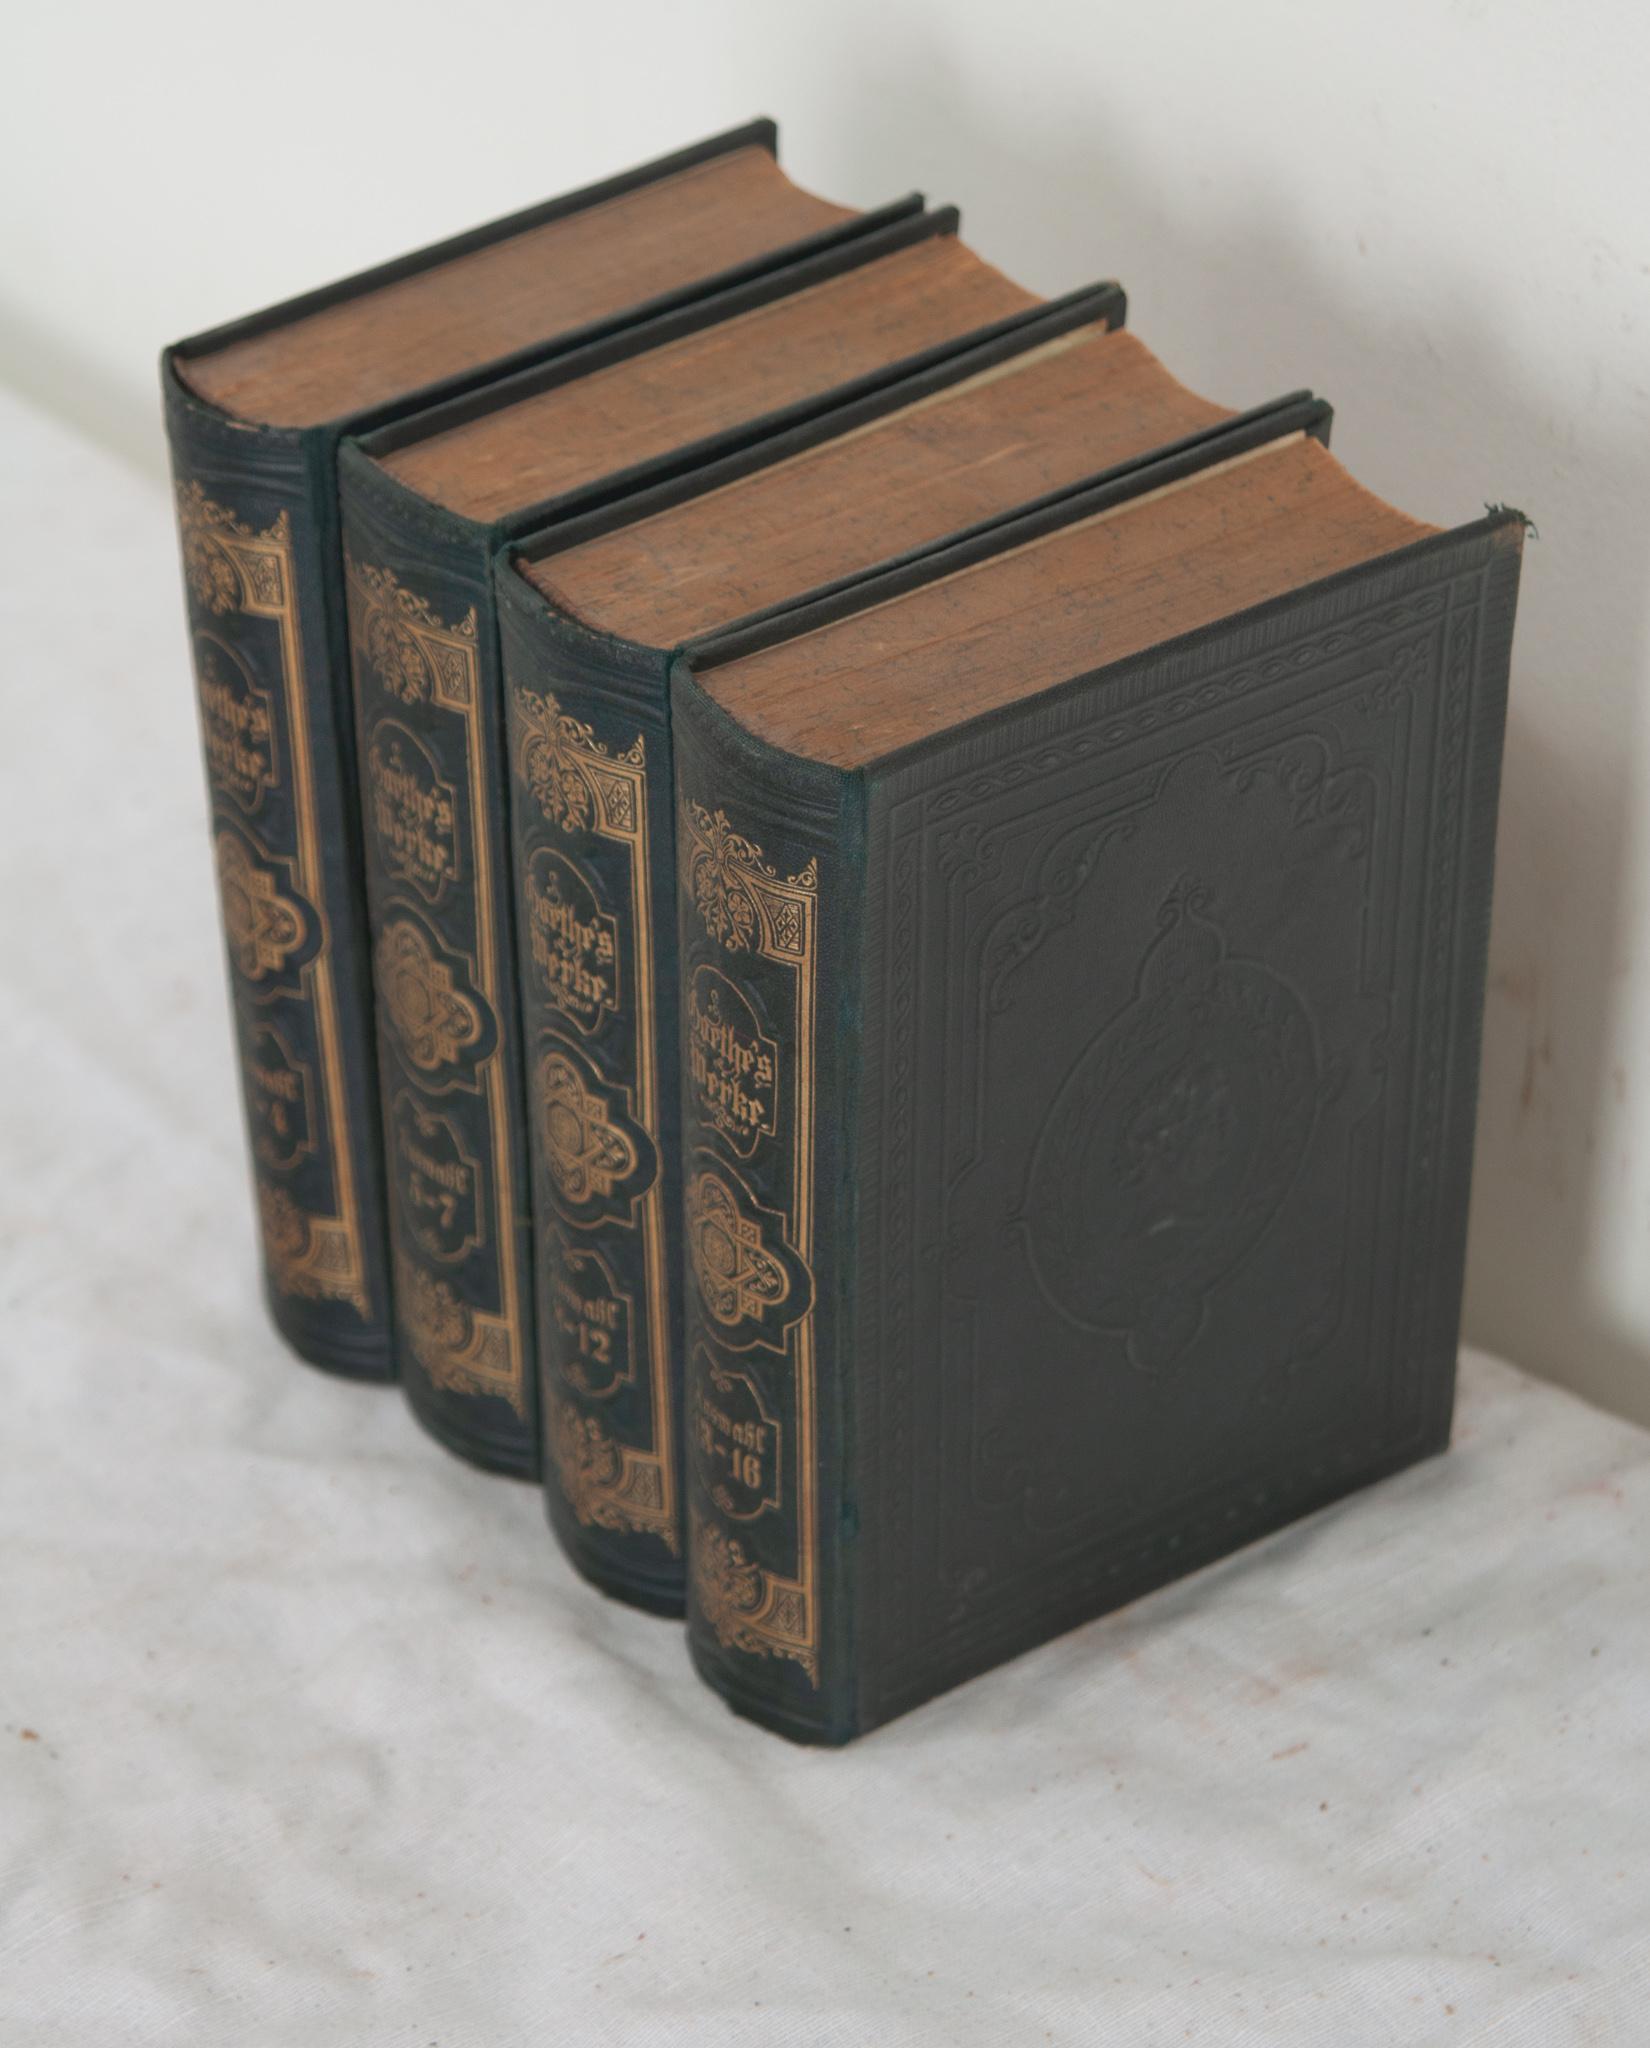 Hand-Crafted Set of 4 Books by German Poet Johann Wolfgang Von Goethe For Sale